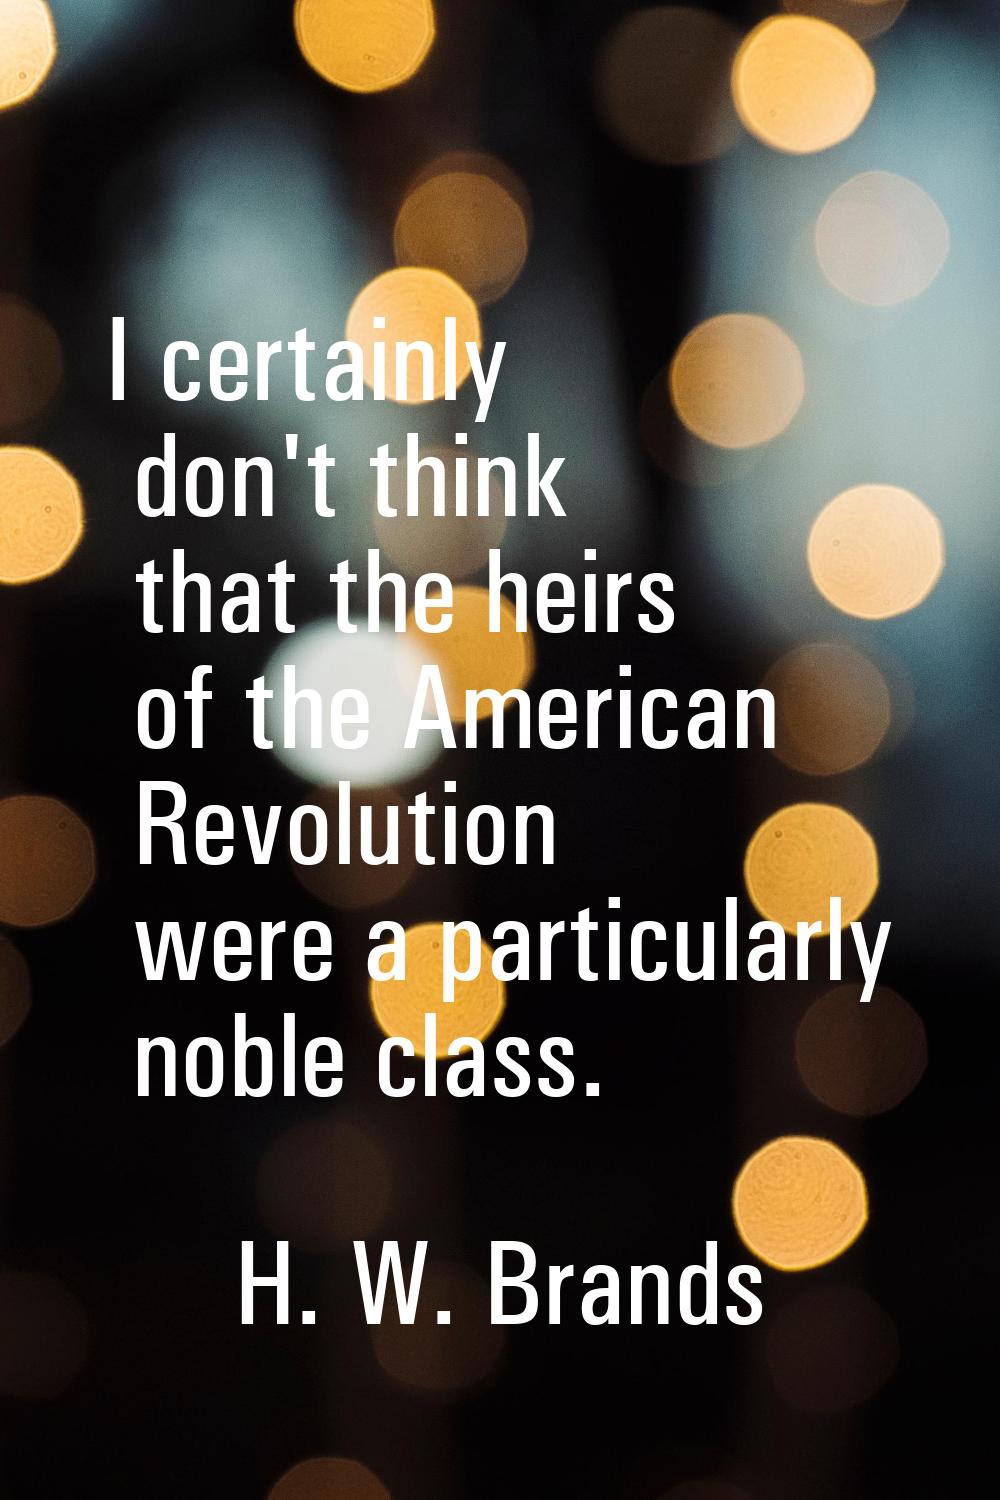 I certainly don't think that the heirs of the American Revolution were a particularly noble class.